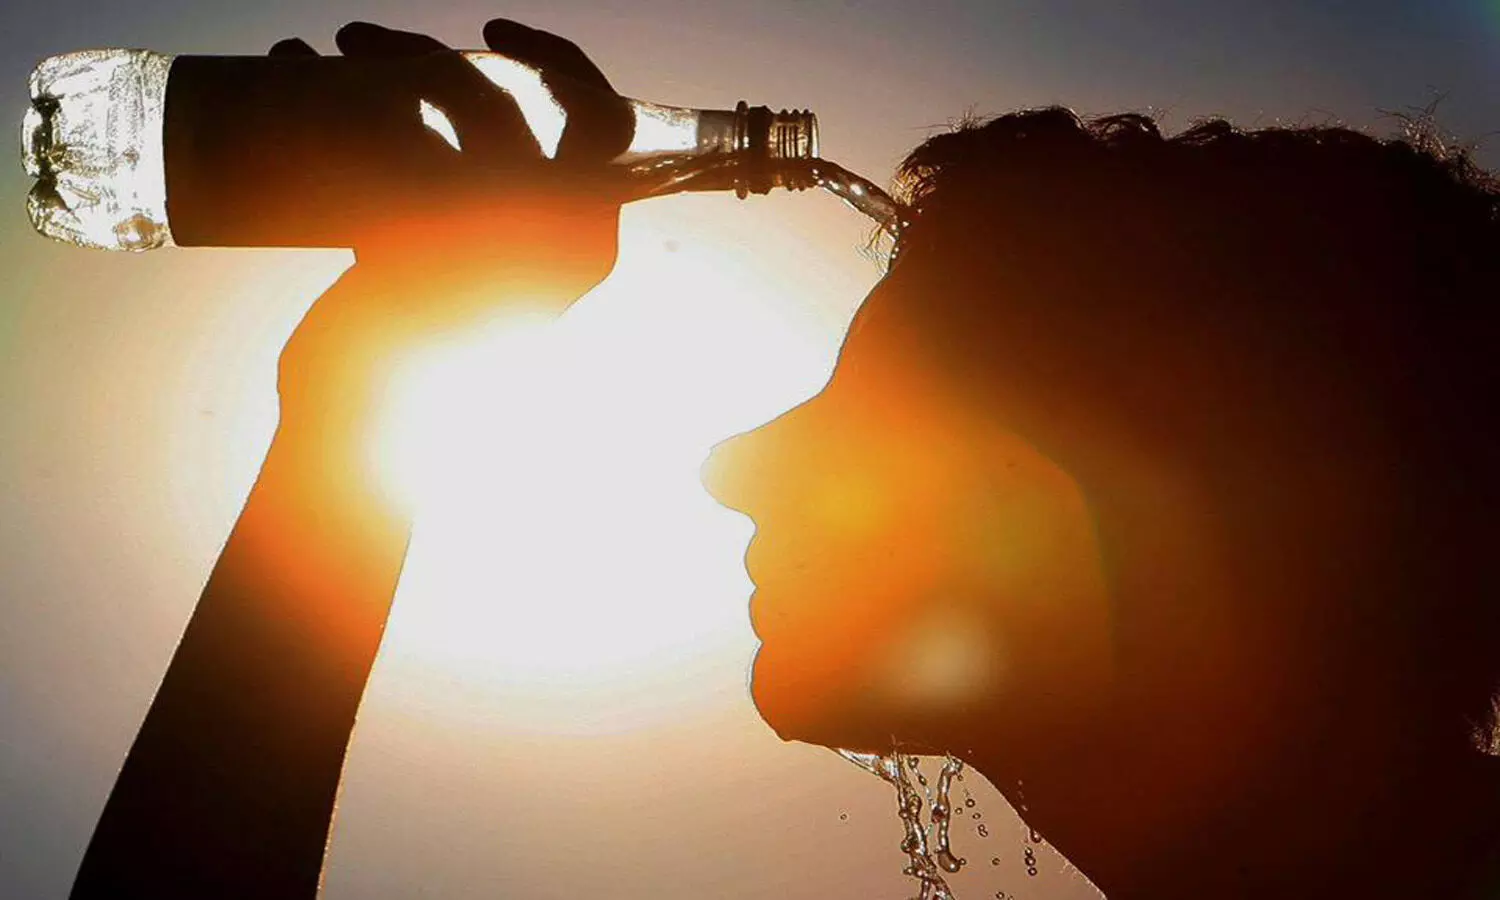 Heatwave Alerts in These 4 Indian States: Temperature to Rise Too Much this Year!